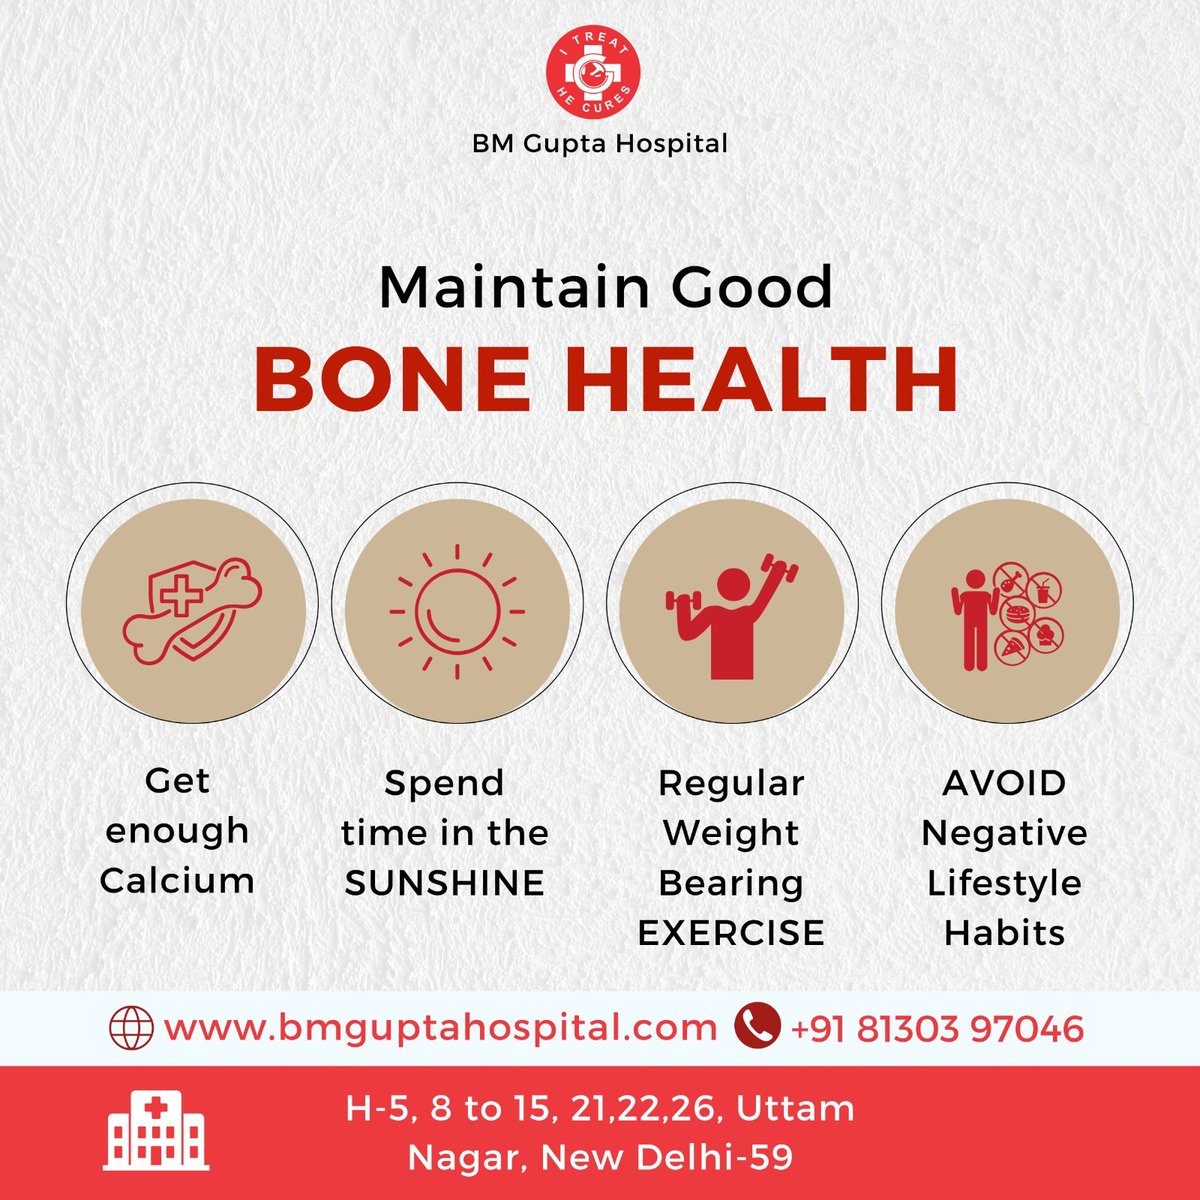 Strong bones are essential for a healthy life!  
For more info
Call us at  91 81303 97046
Mail us: bmguptagnh@gmail.com

#BMGH #BMGuptaHospital #health #healthcare #CalciumRich #SunshineVitamin #HealthyBones #FitnessTips #WellnessGoals #bonehealth